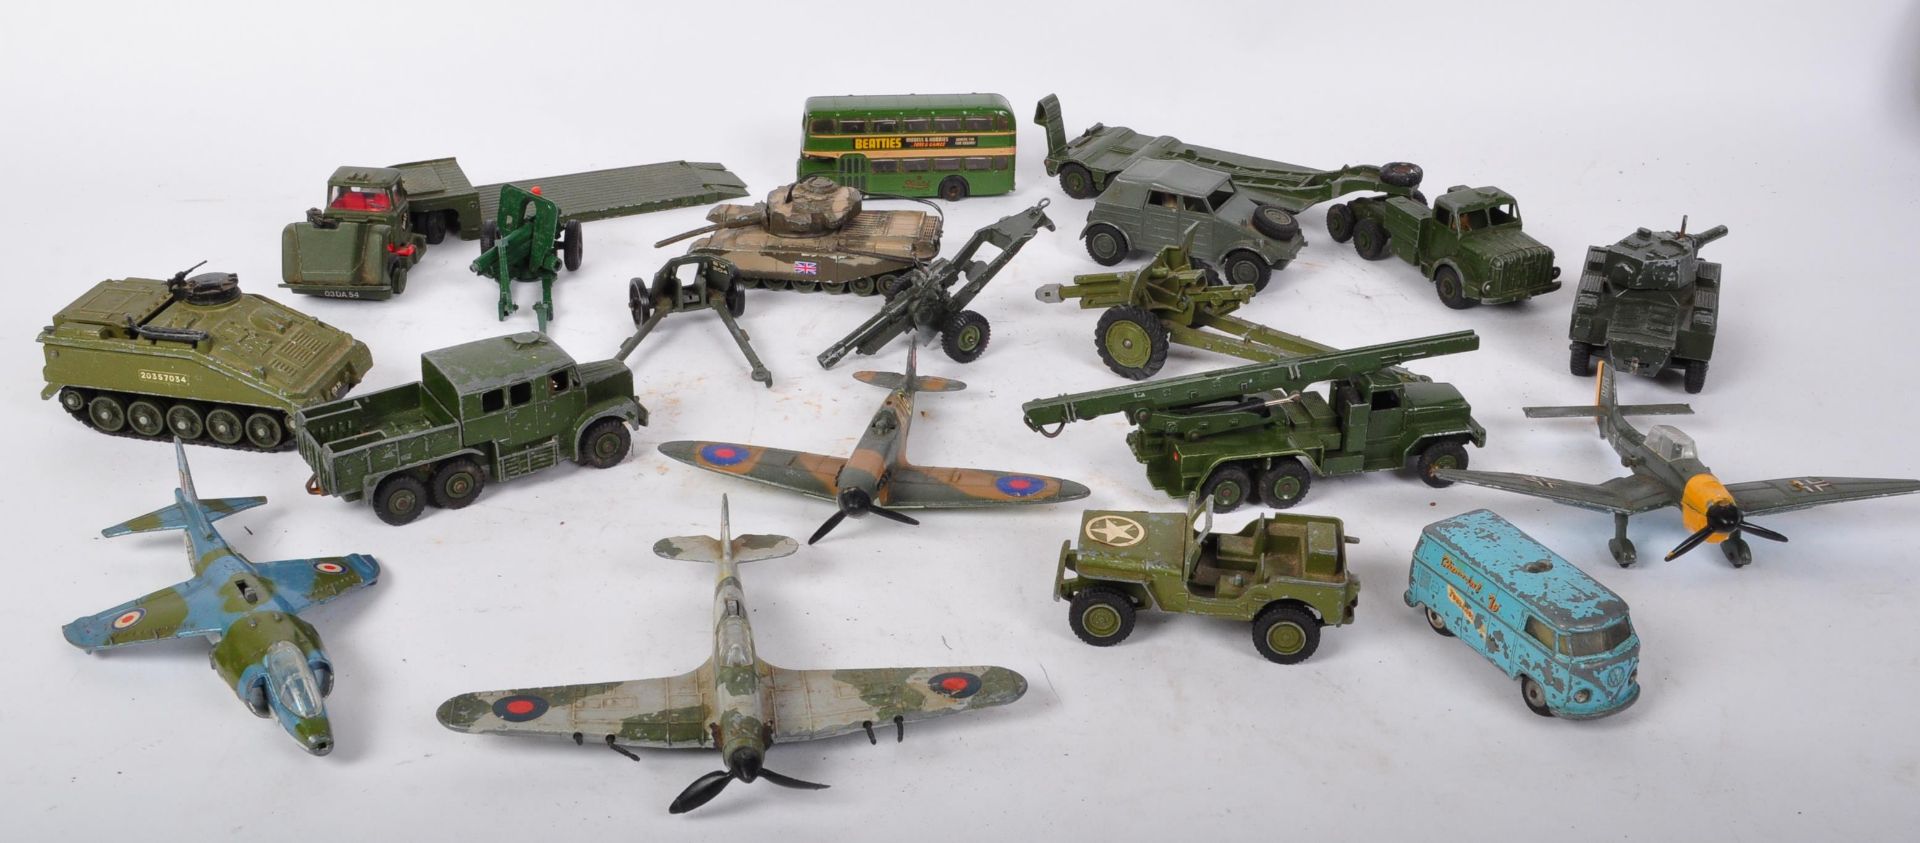 A COLLECTION OF VINTAGE MILITARY STYLE TOYS - CORGI - DINKY & MORE